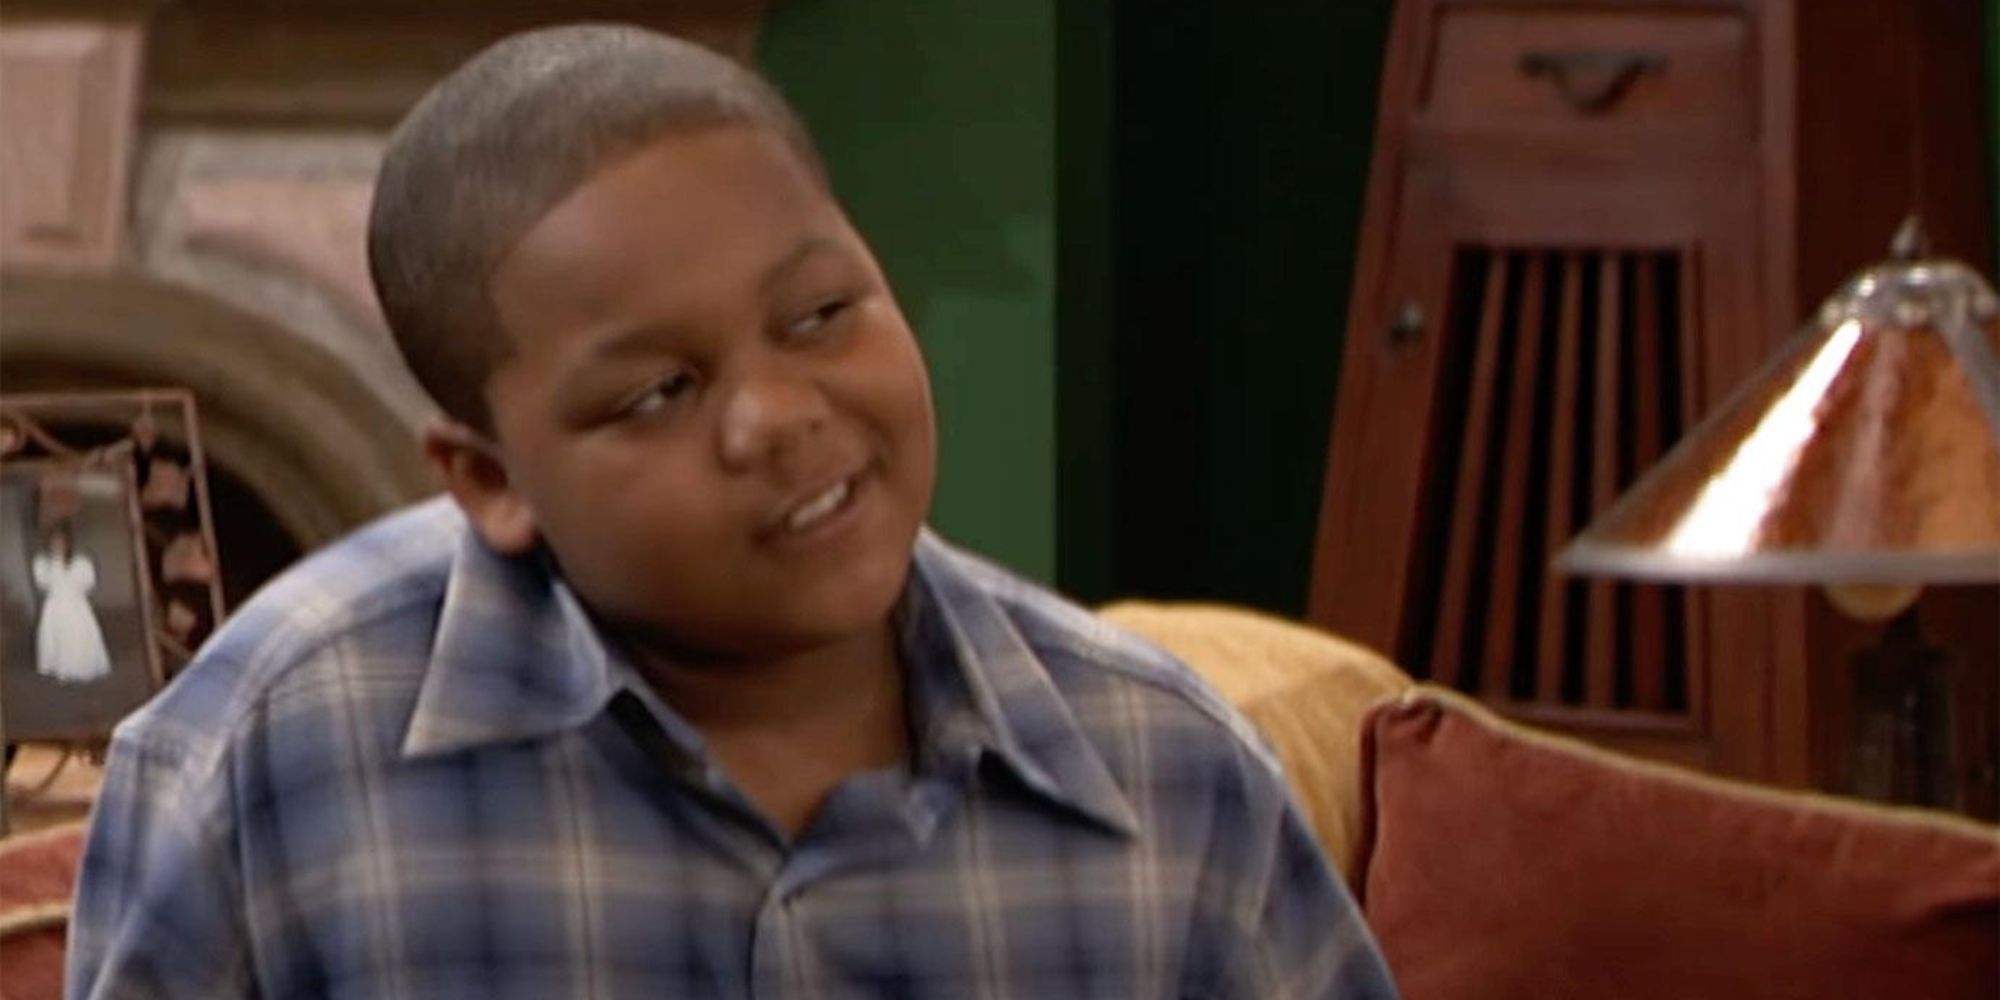 Screengrab from That's So Raven of Cory Baxter.